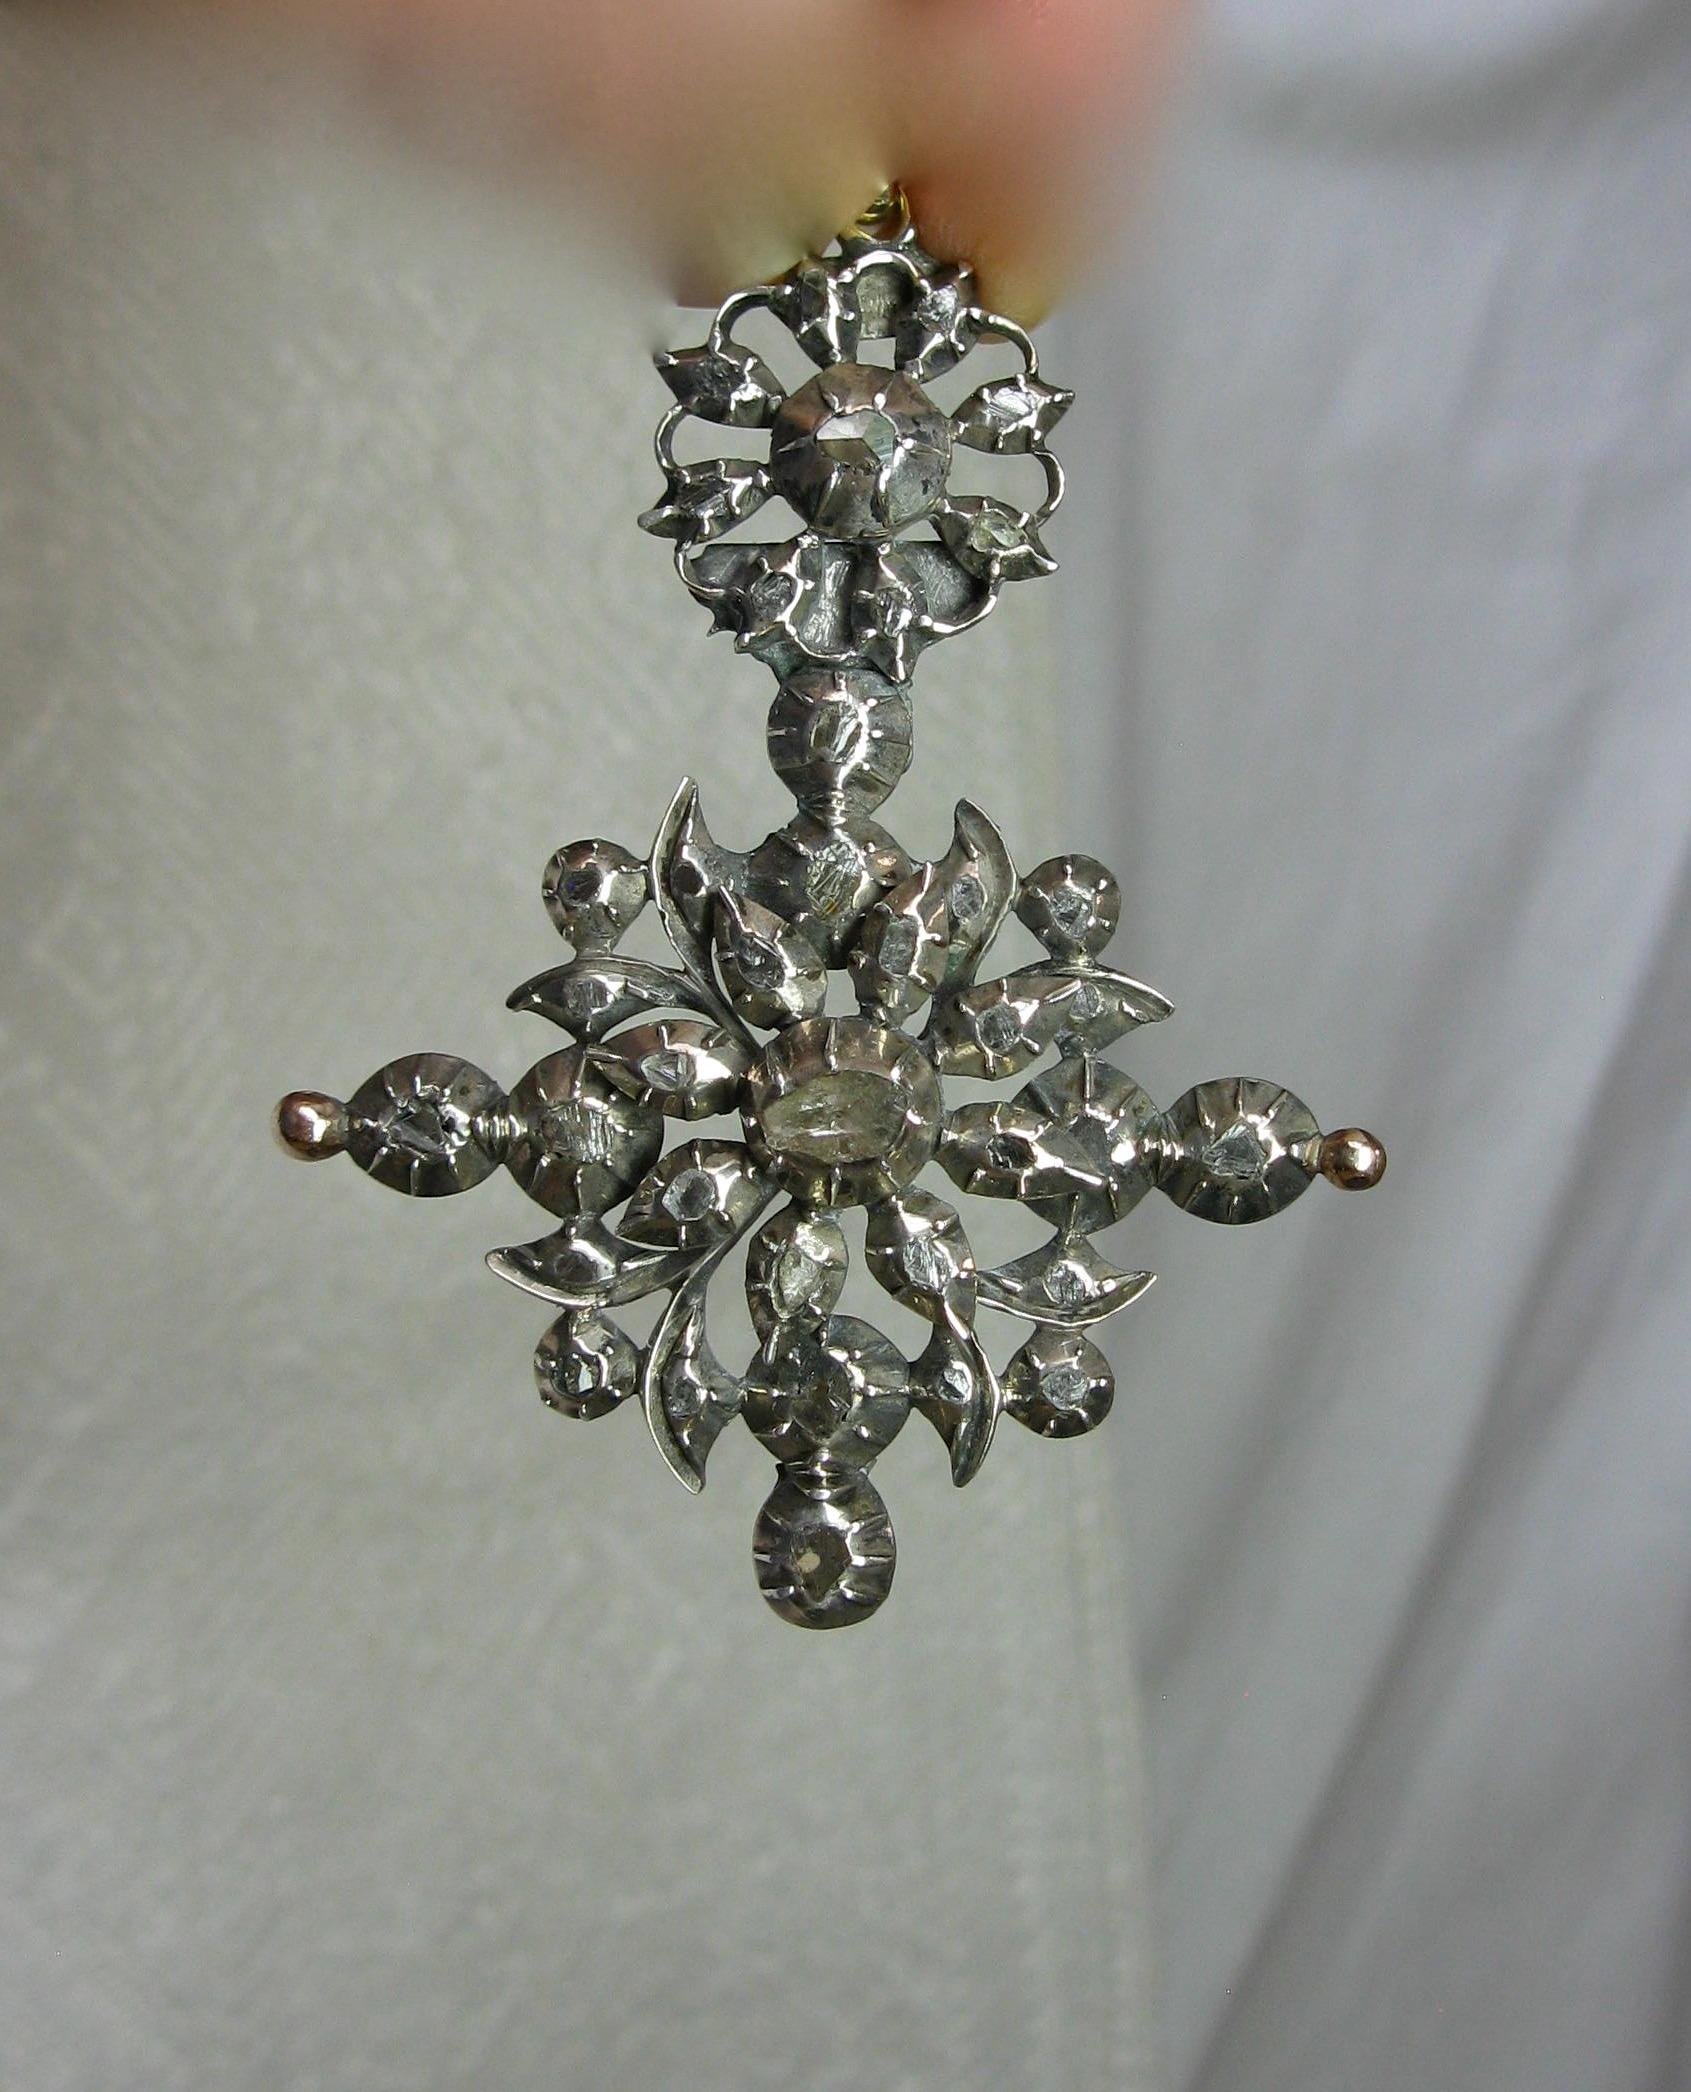 This is a rare museum quality early Rose Cut Diamond Pendant dating to the Georgian Era set with an abundance of antique Rose Cut Diamonds set in silver atop 14 Karat gold as was the custom of the period.  The pendant of great beauty and dating to